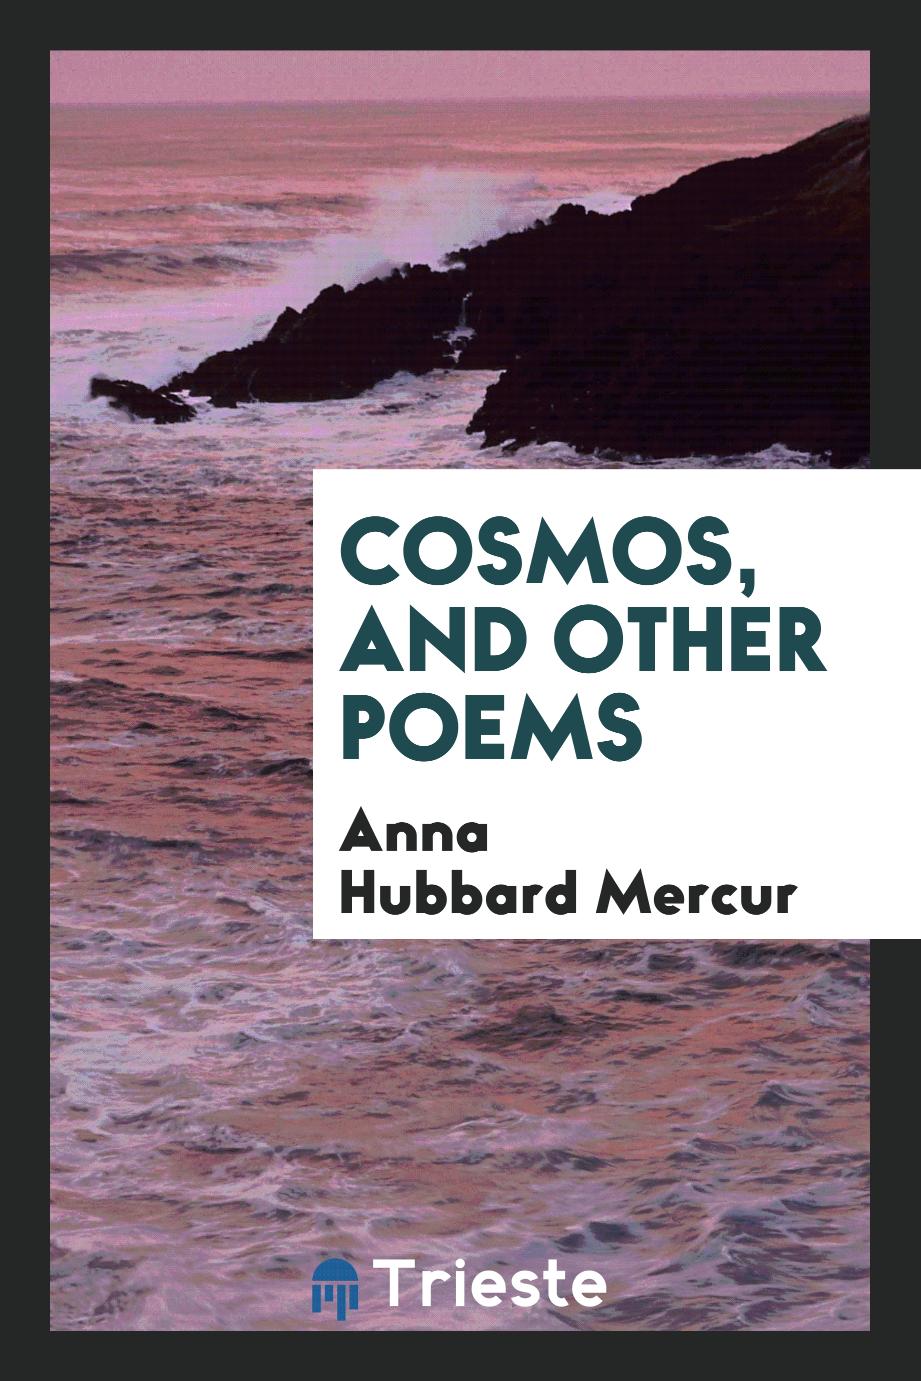 Cosmos, and other poems